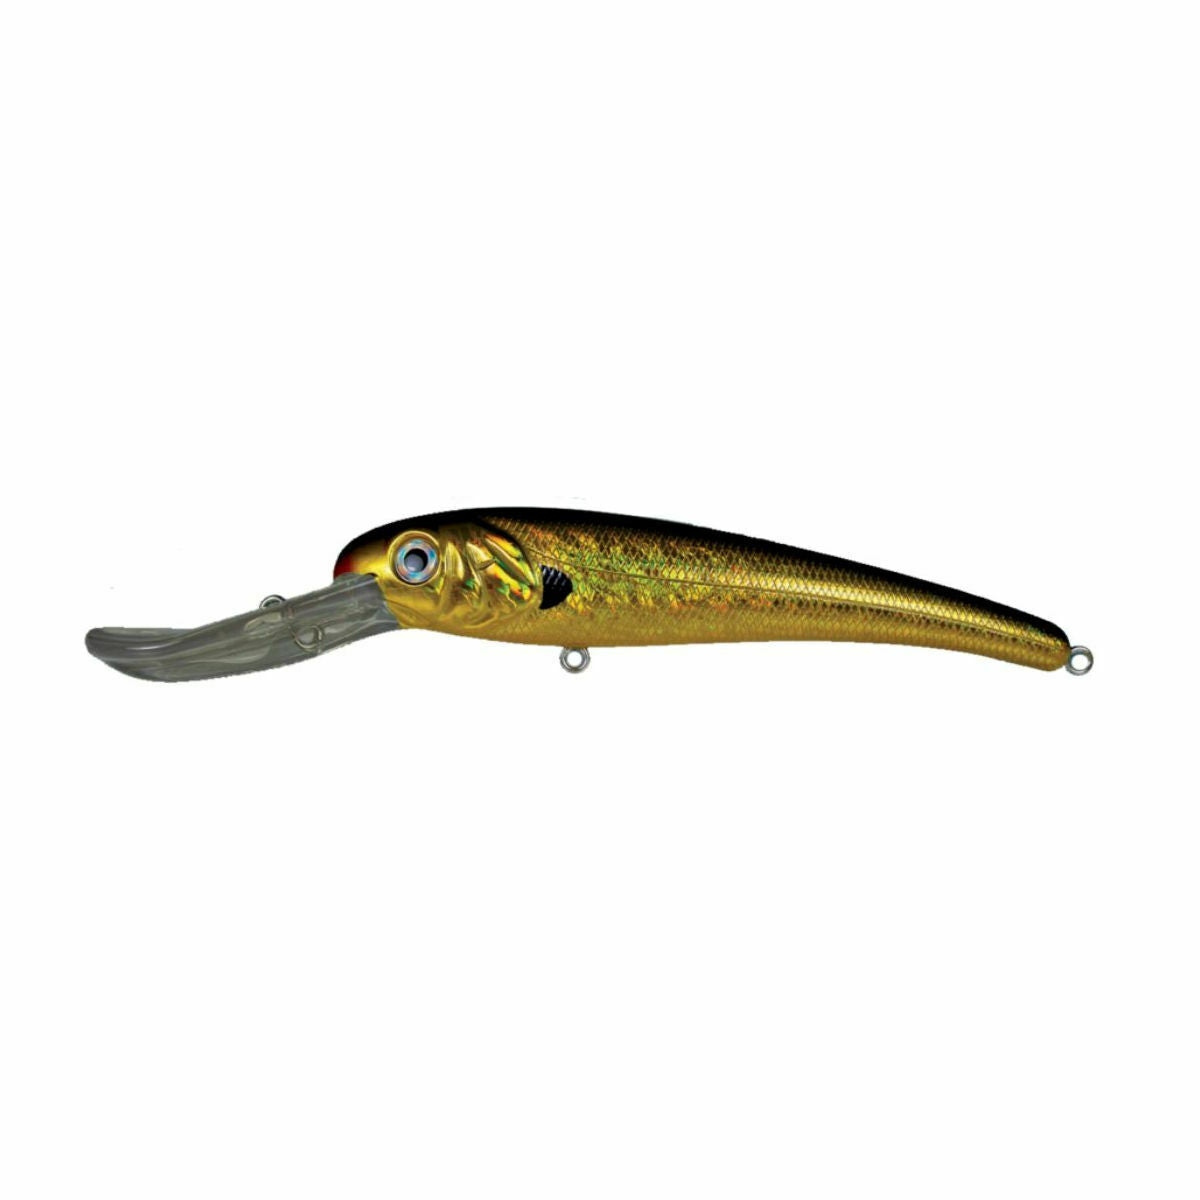 Mann's Stretch 15+, 25+, 30+ Trolling Lures - 25+ - Length: 8 - Weight:  2oz / Gold/Black